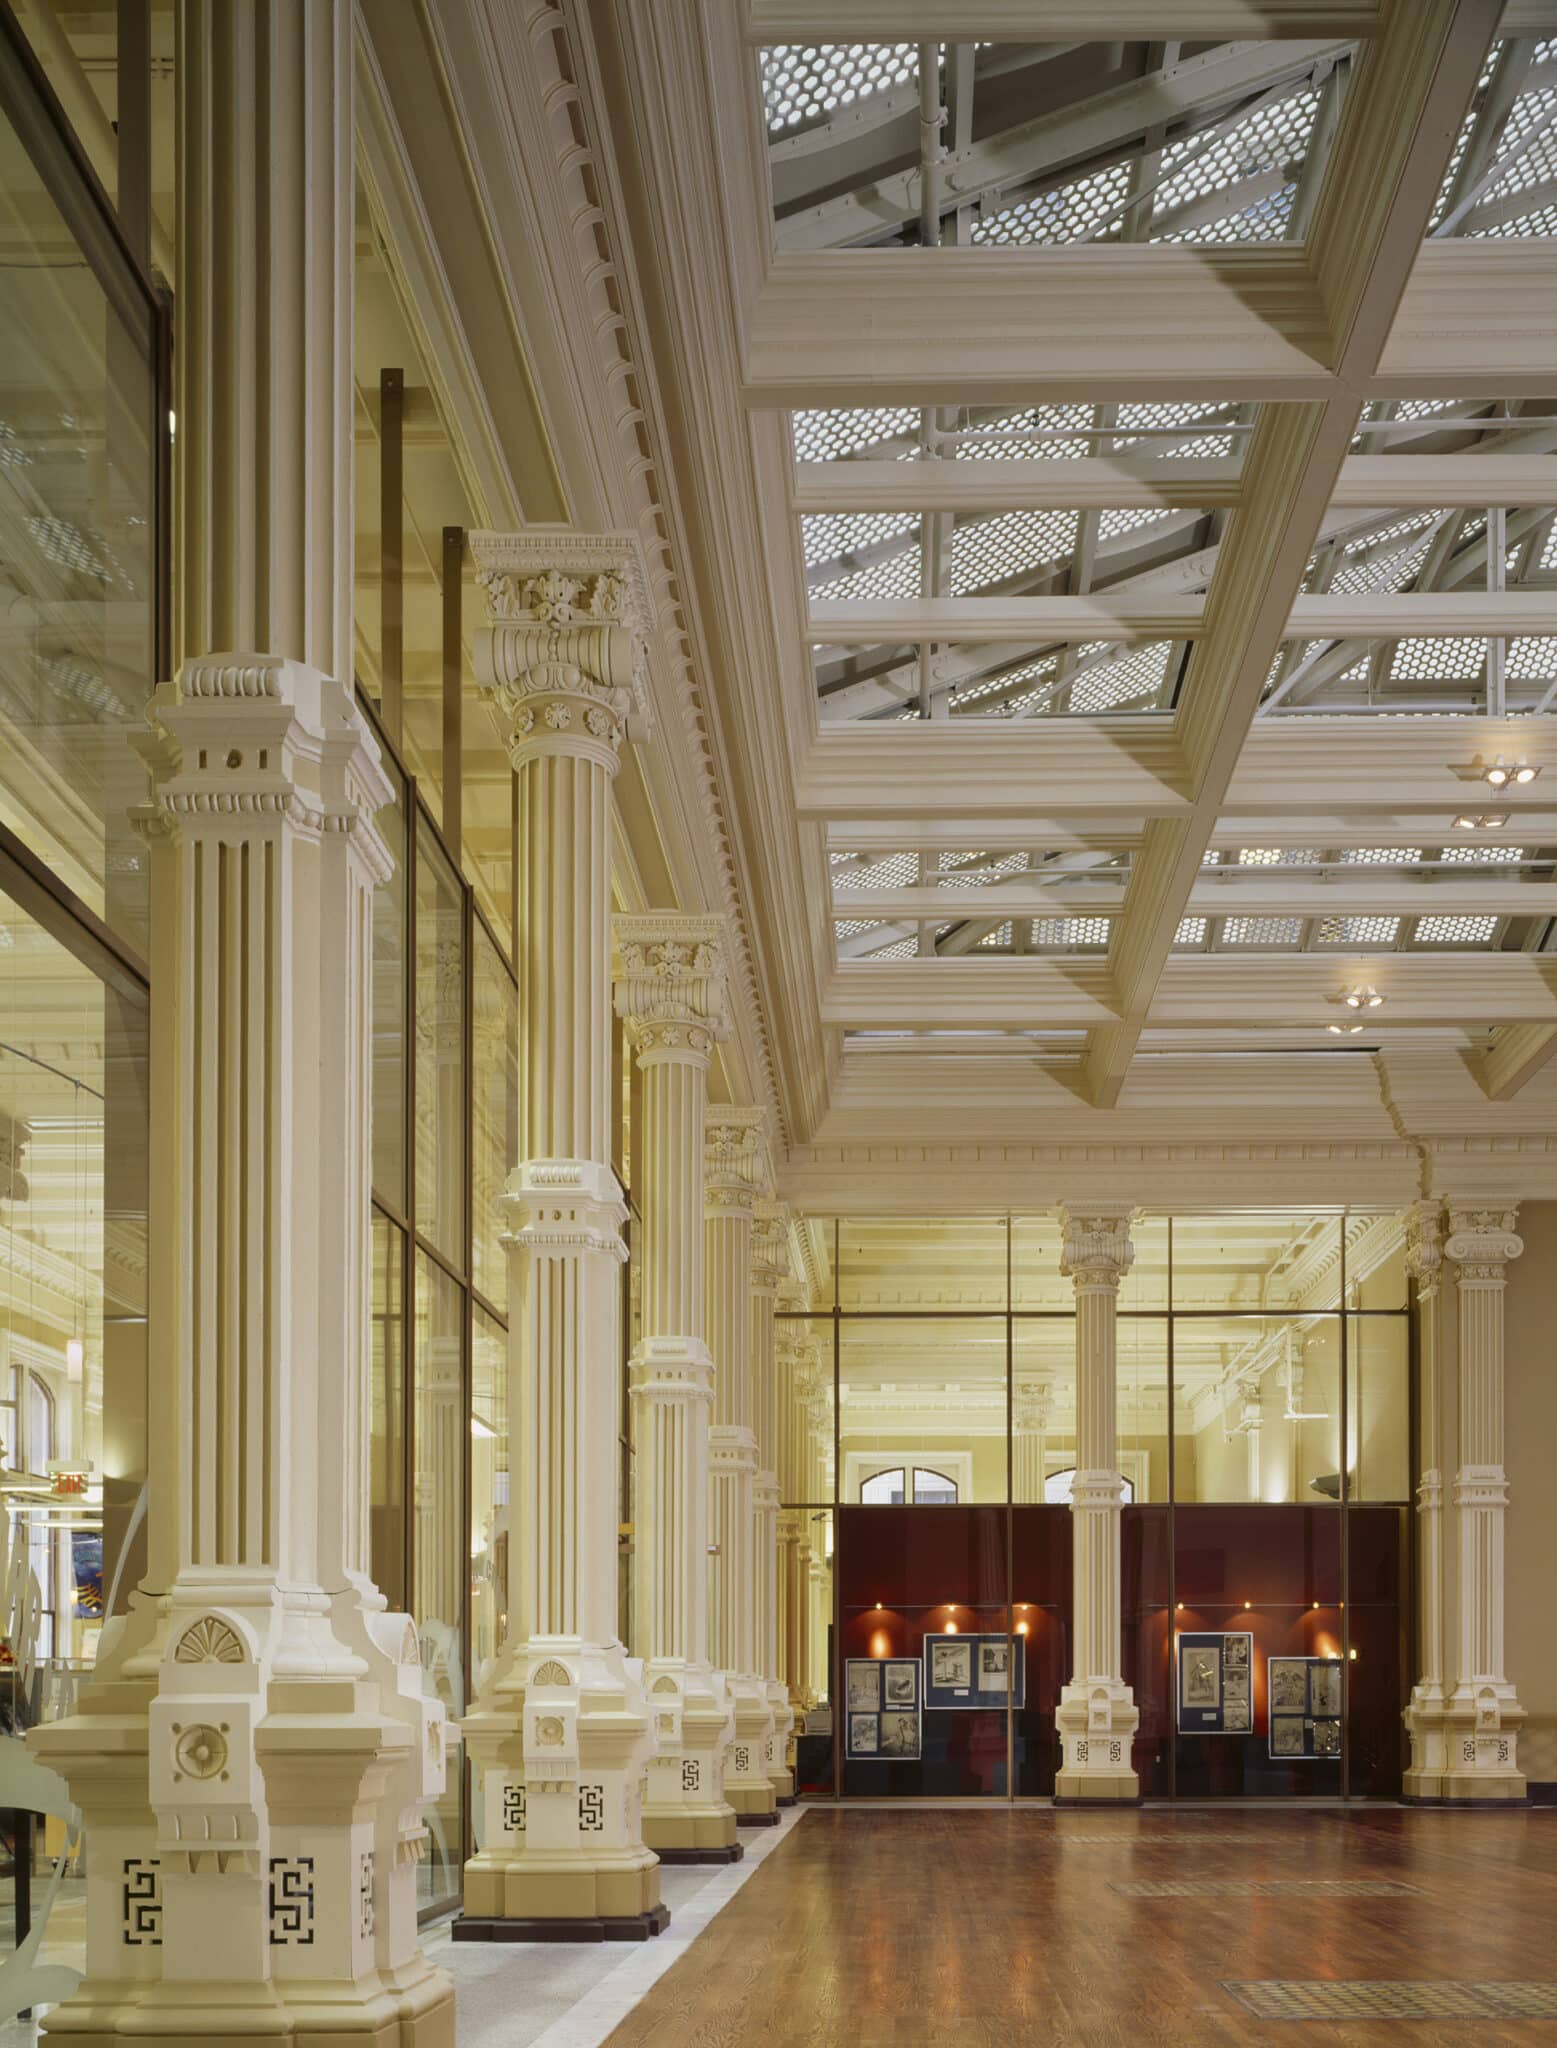 interior of the old post office federal building designed by trivers architectural firm in st. louis